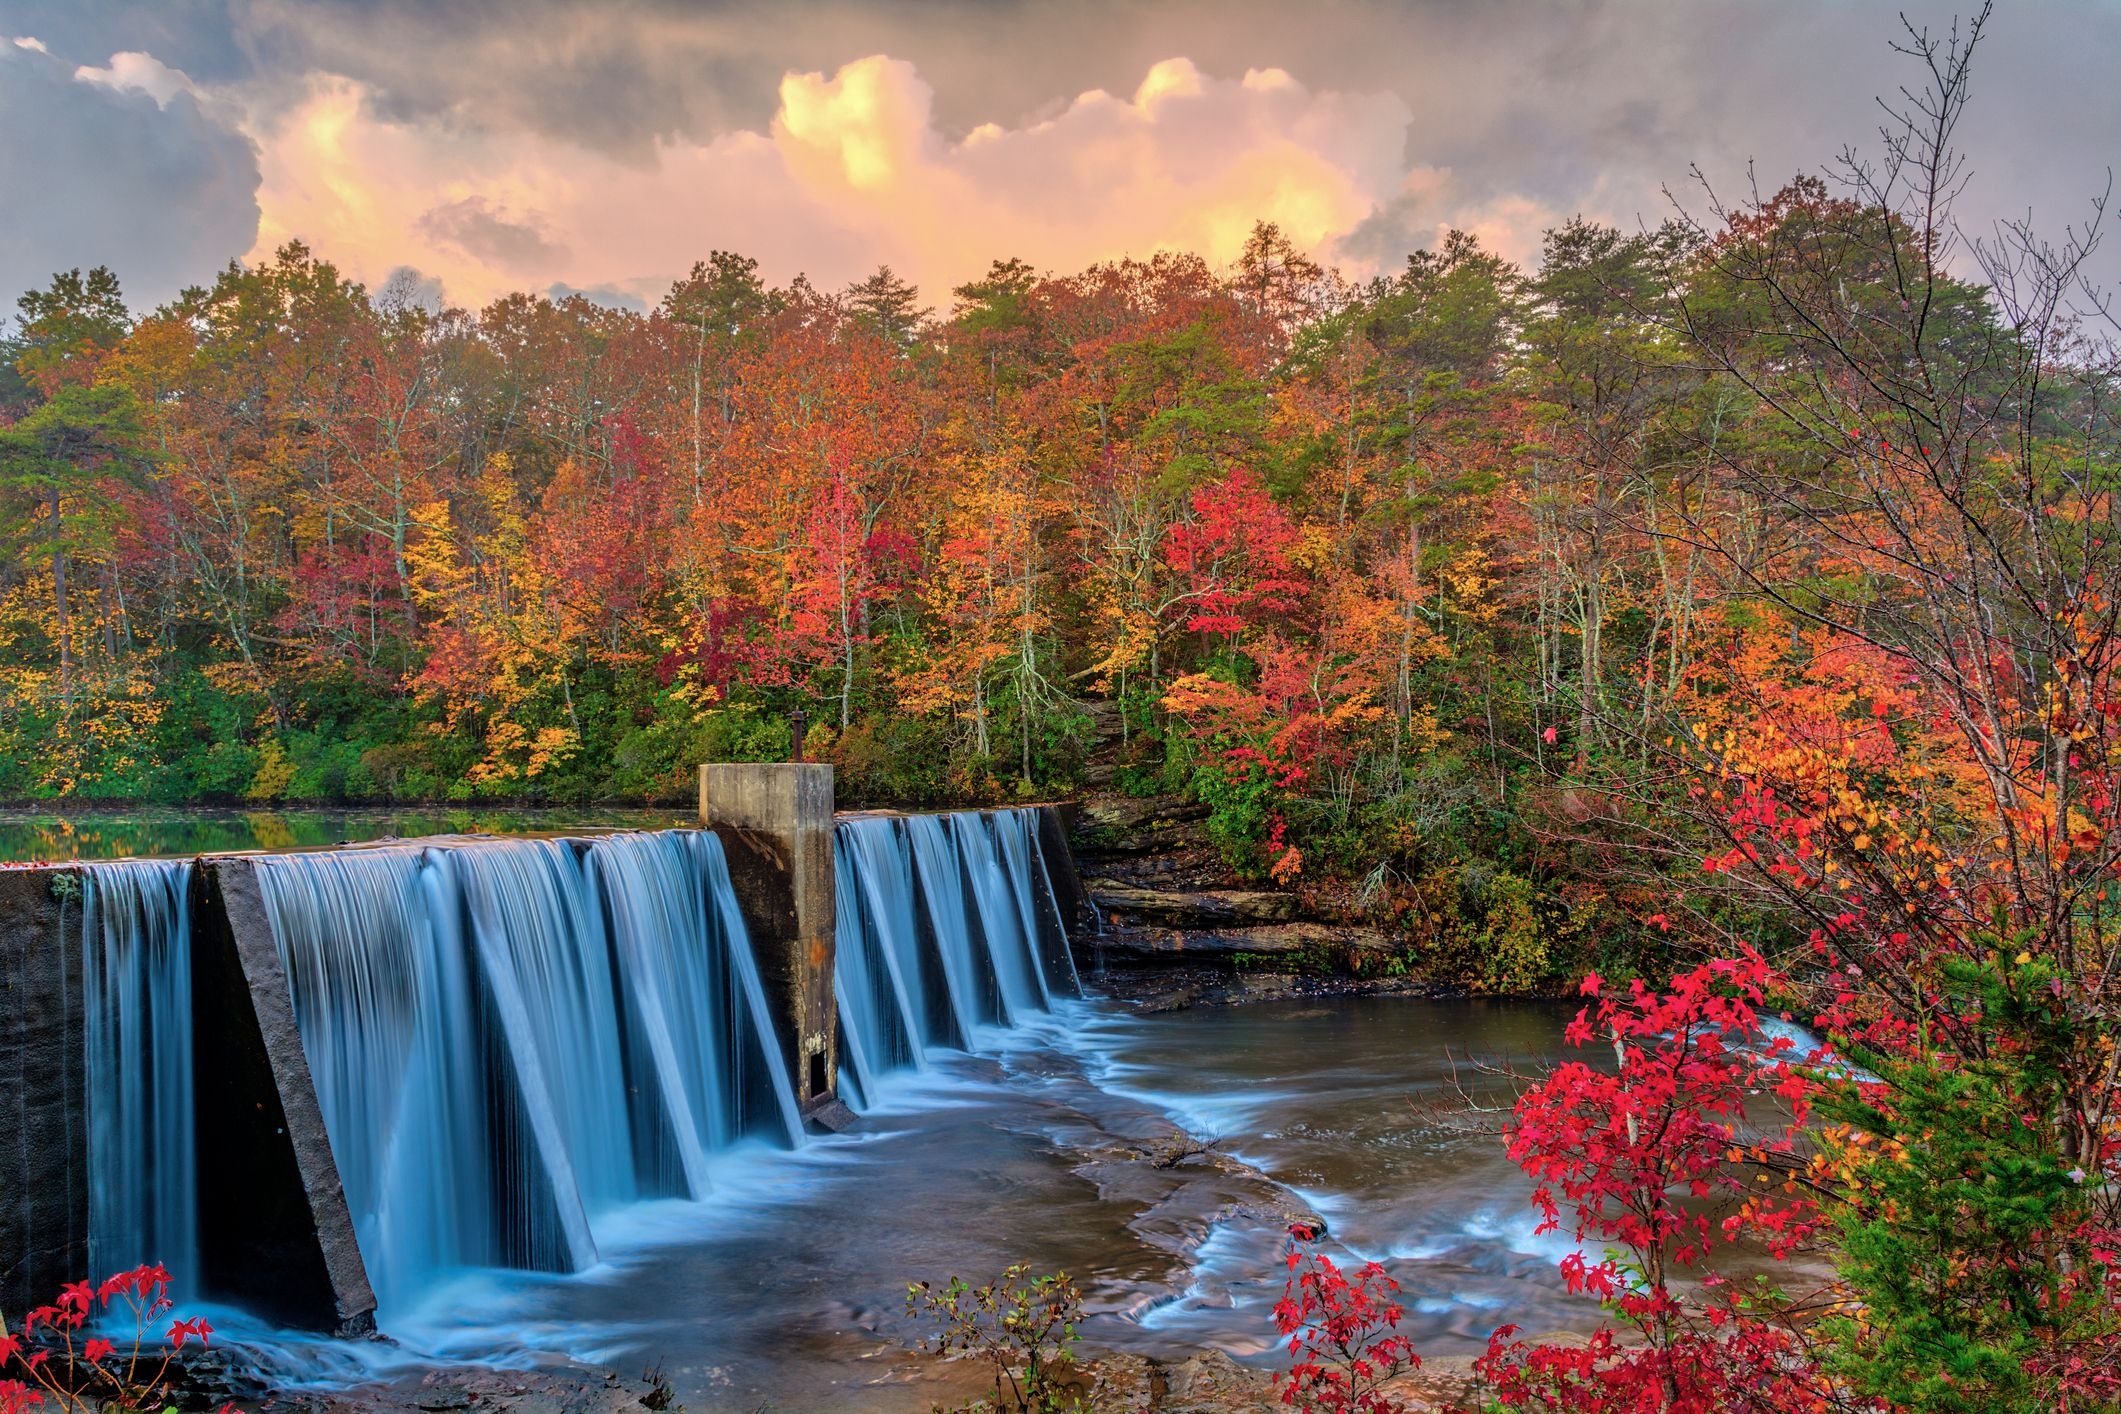 Scenic road trips, Autumn panorama, National parks, Leaf peeping destinations, Nature's mosaic, 2130x1420 HD Desktop